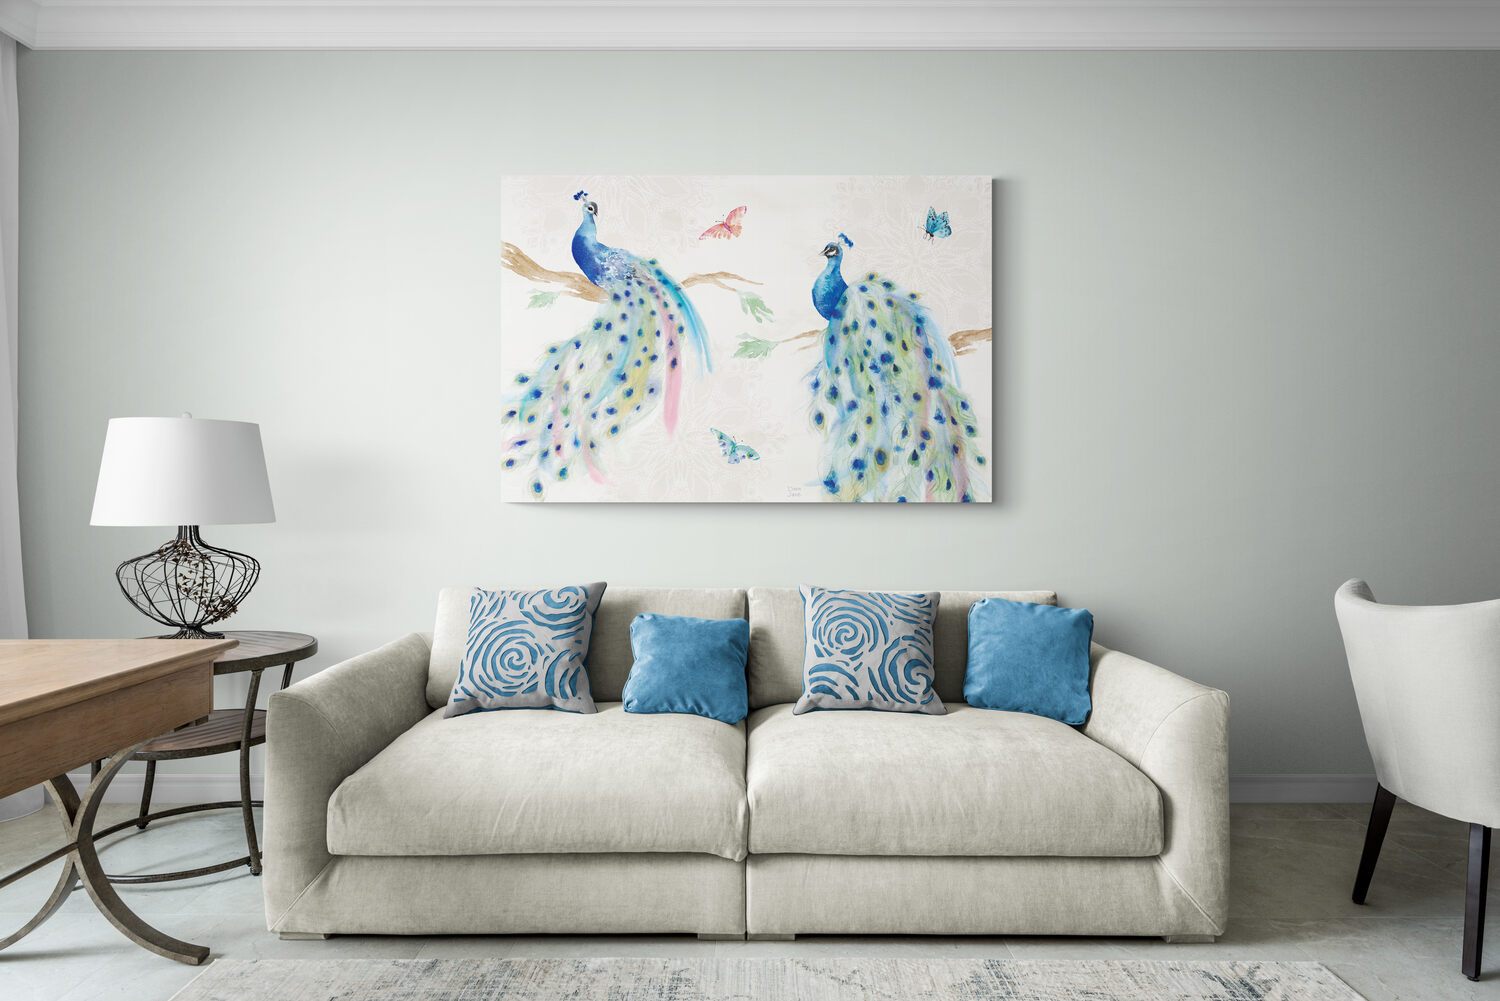 Art to Transform Your Home and Mind